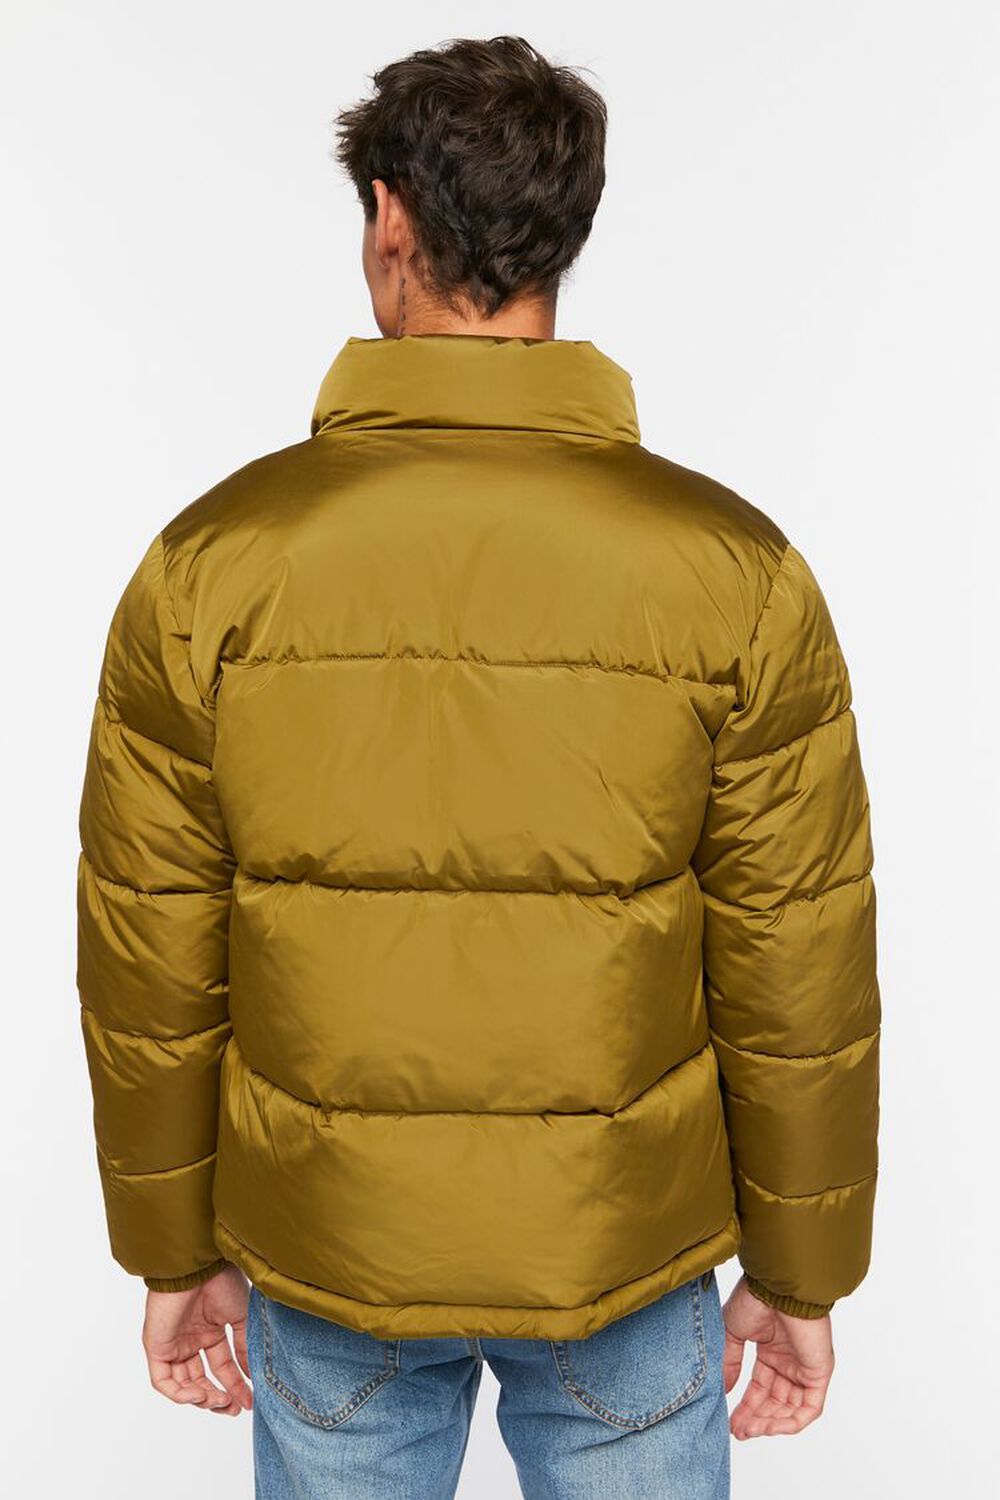 OLIVE Quilted Puffer Jacket, image 3